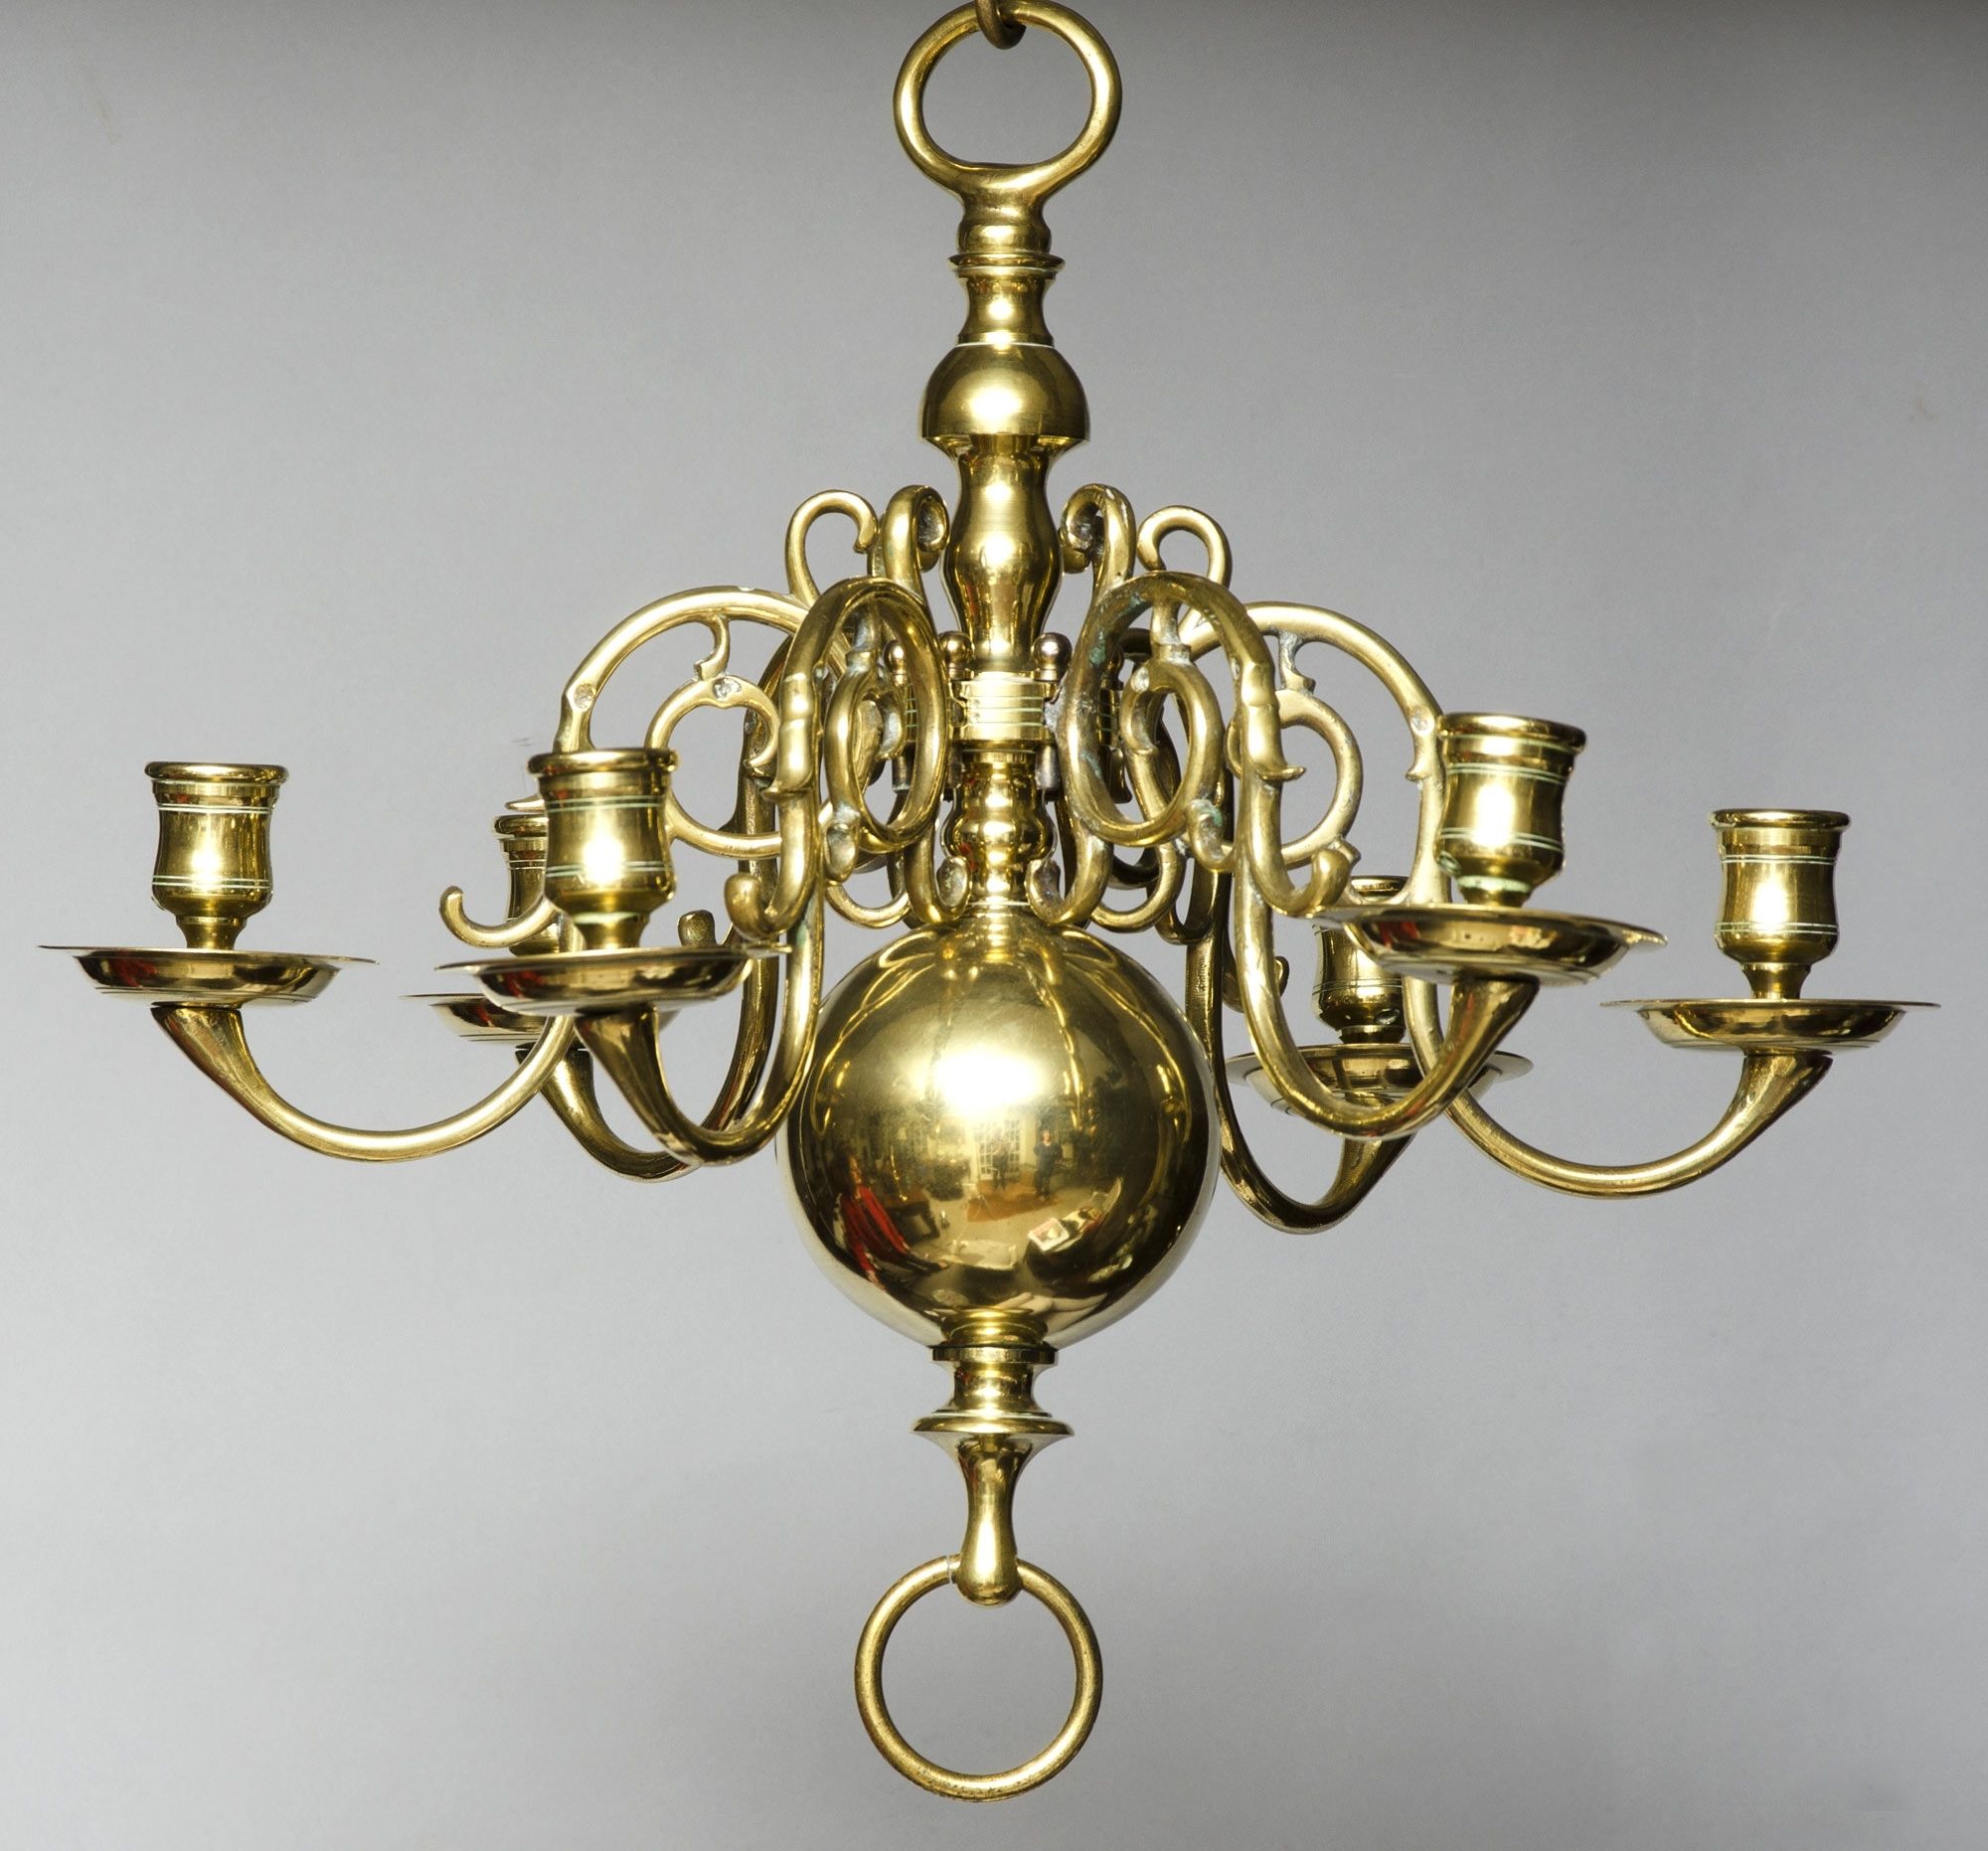 Brass Chandeliers Intended For Most Current Product » Small Dutch Brass Chandelier (View 11 of 15)